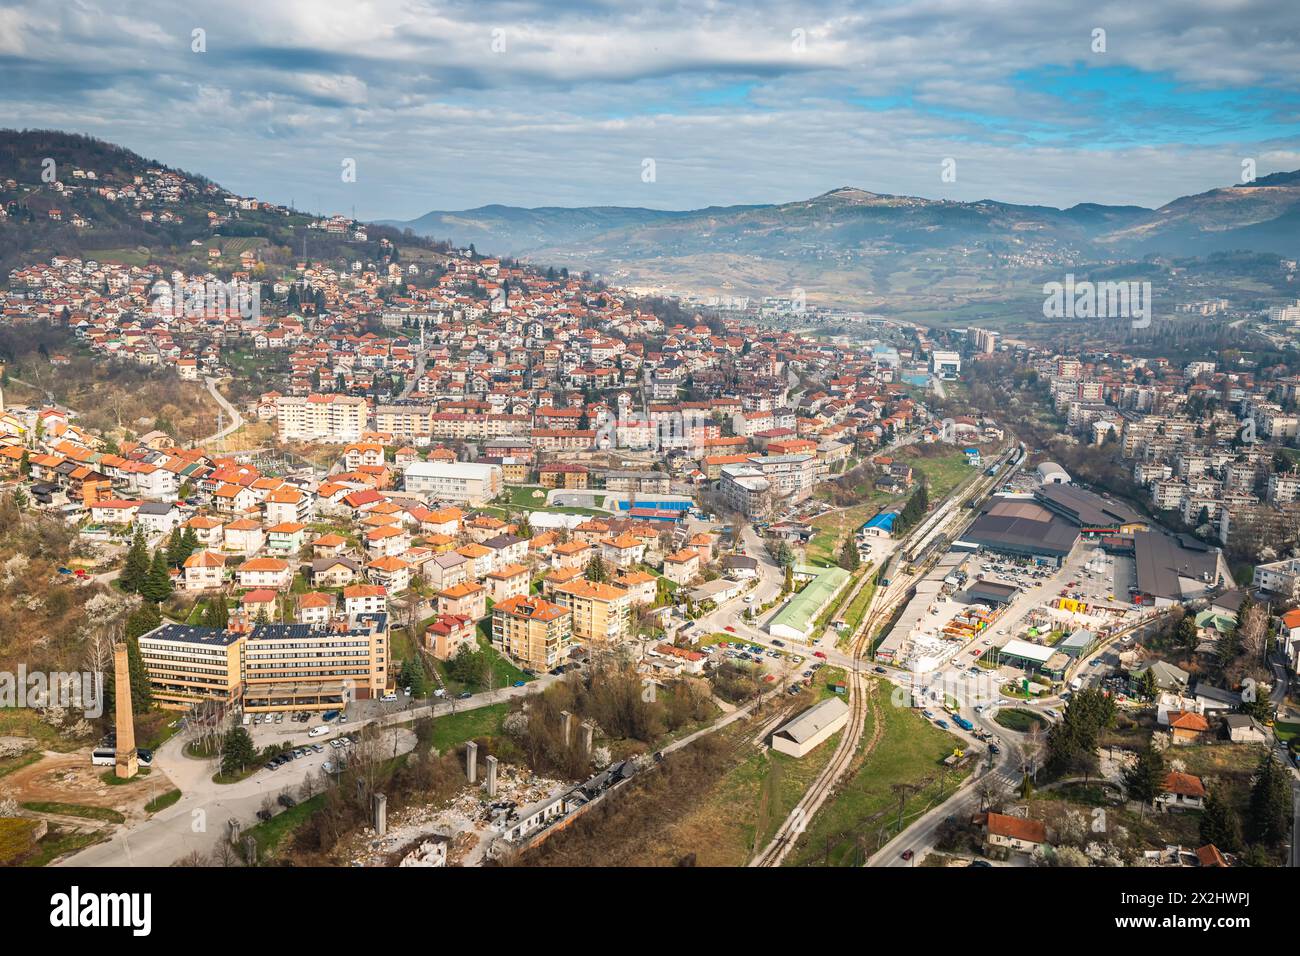 rich history and cultural heritage of Sarajevo from the unique vantage point, where panoramic views showcase the city's charm. Stock Photo